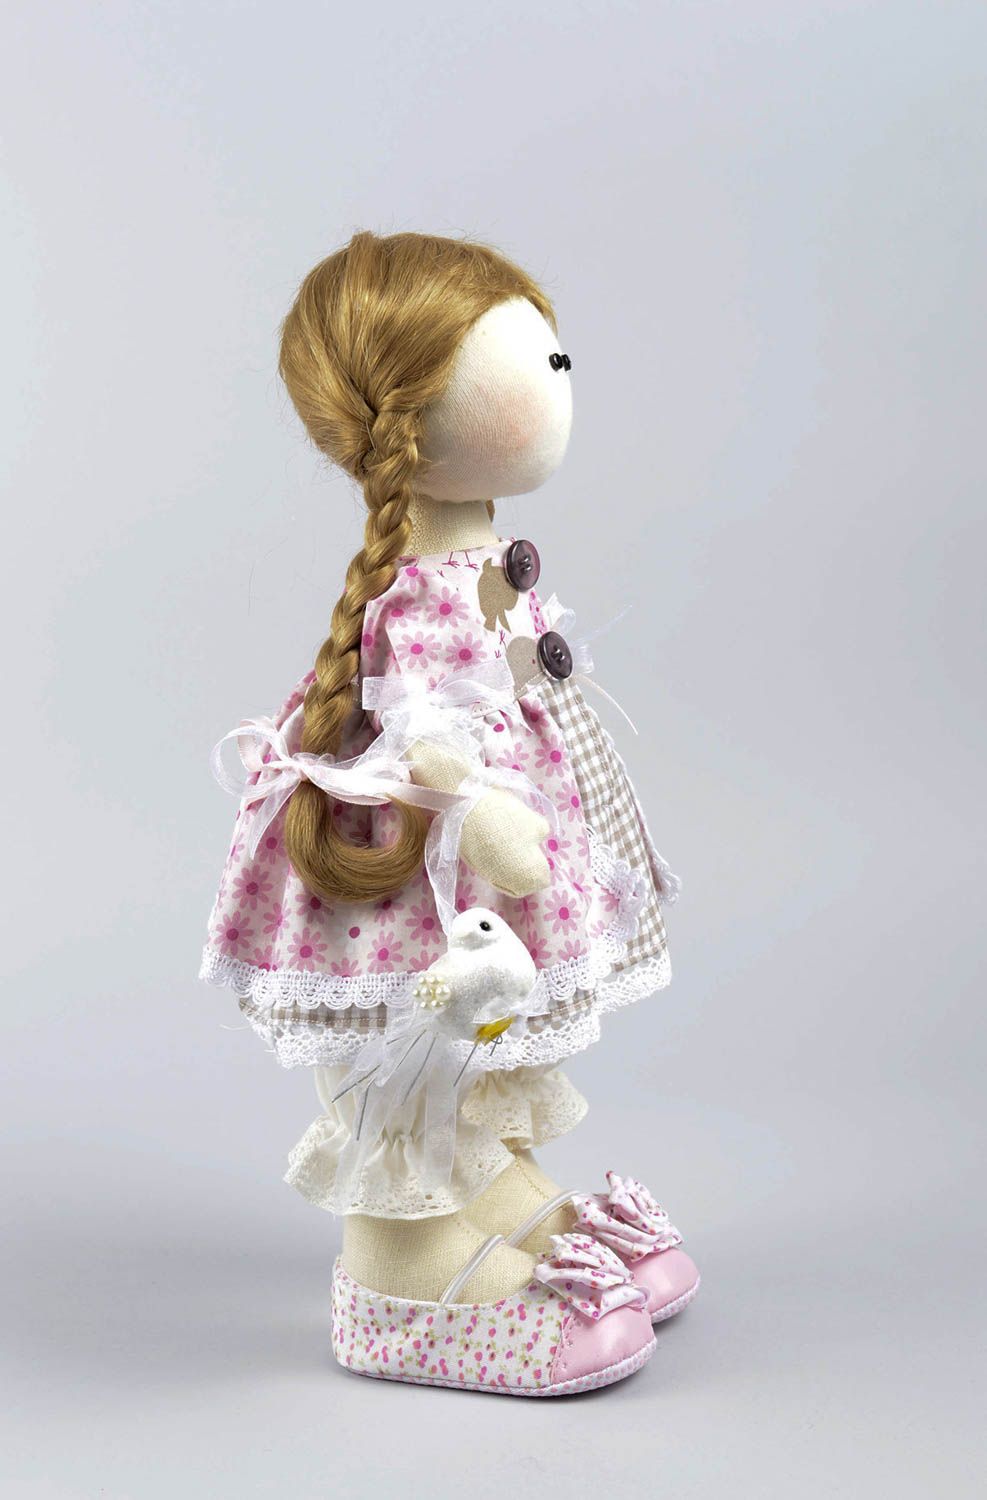 Beautiful handmade rag doll best toys for kids stuffed fabric toy gift ideas photo 2